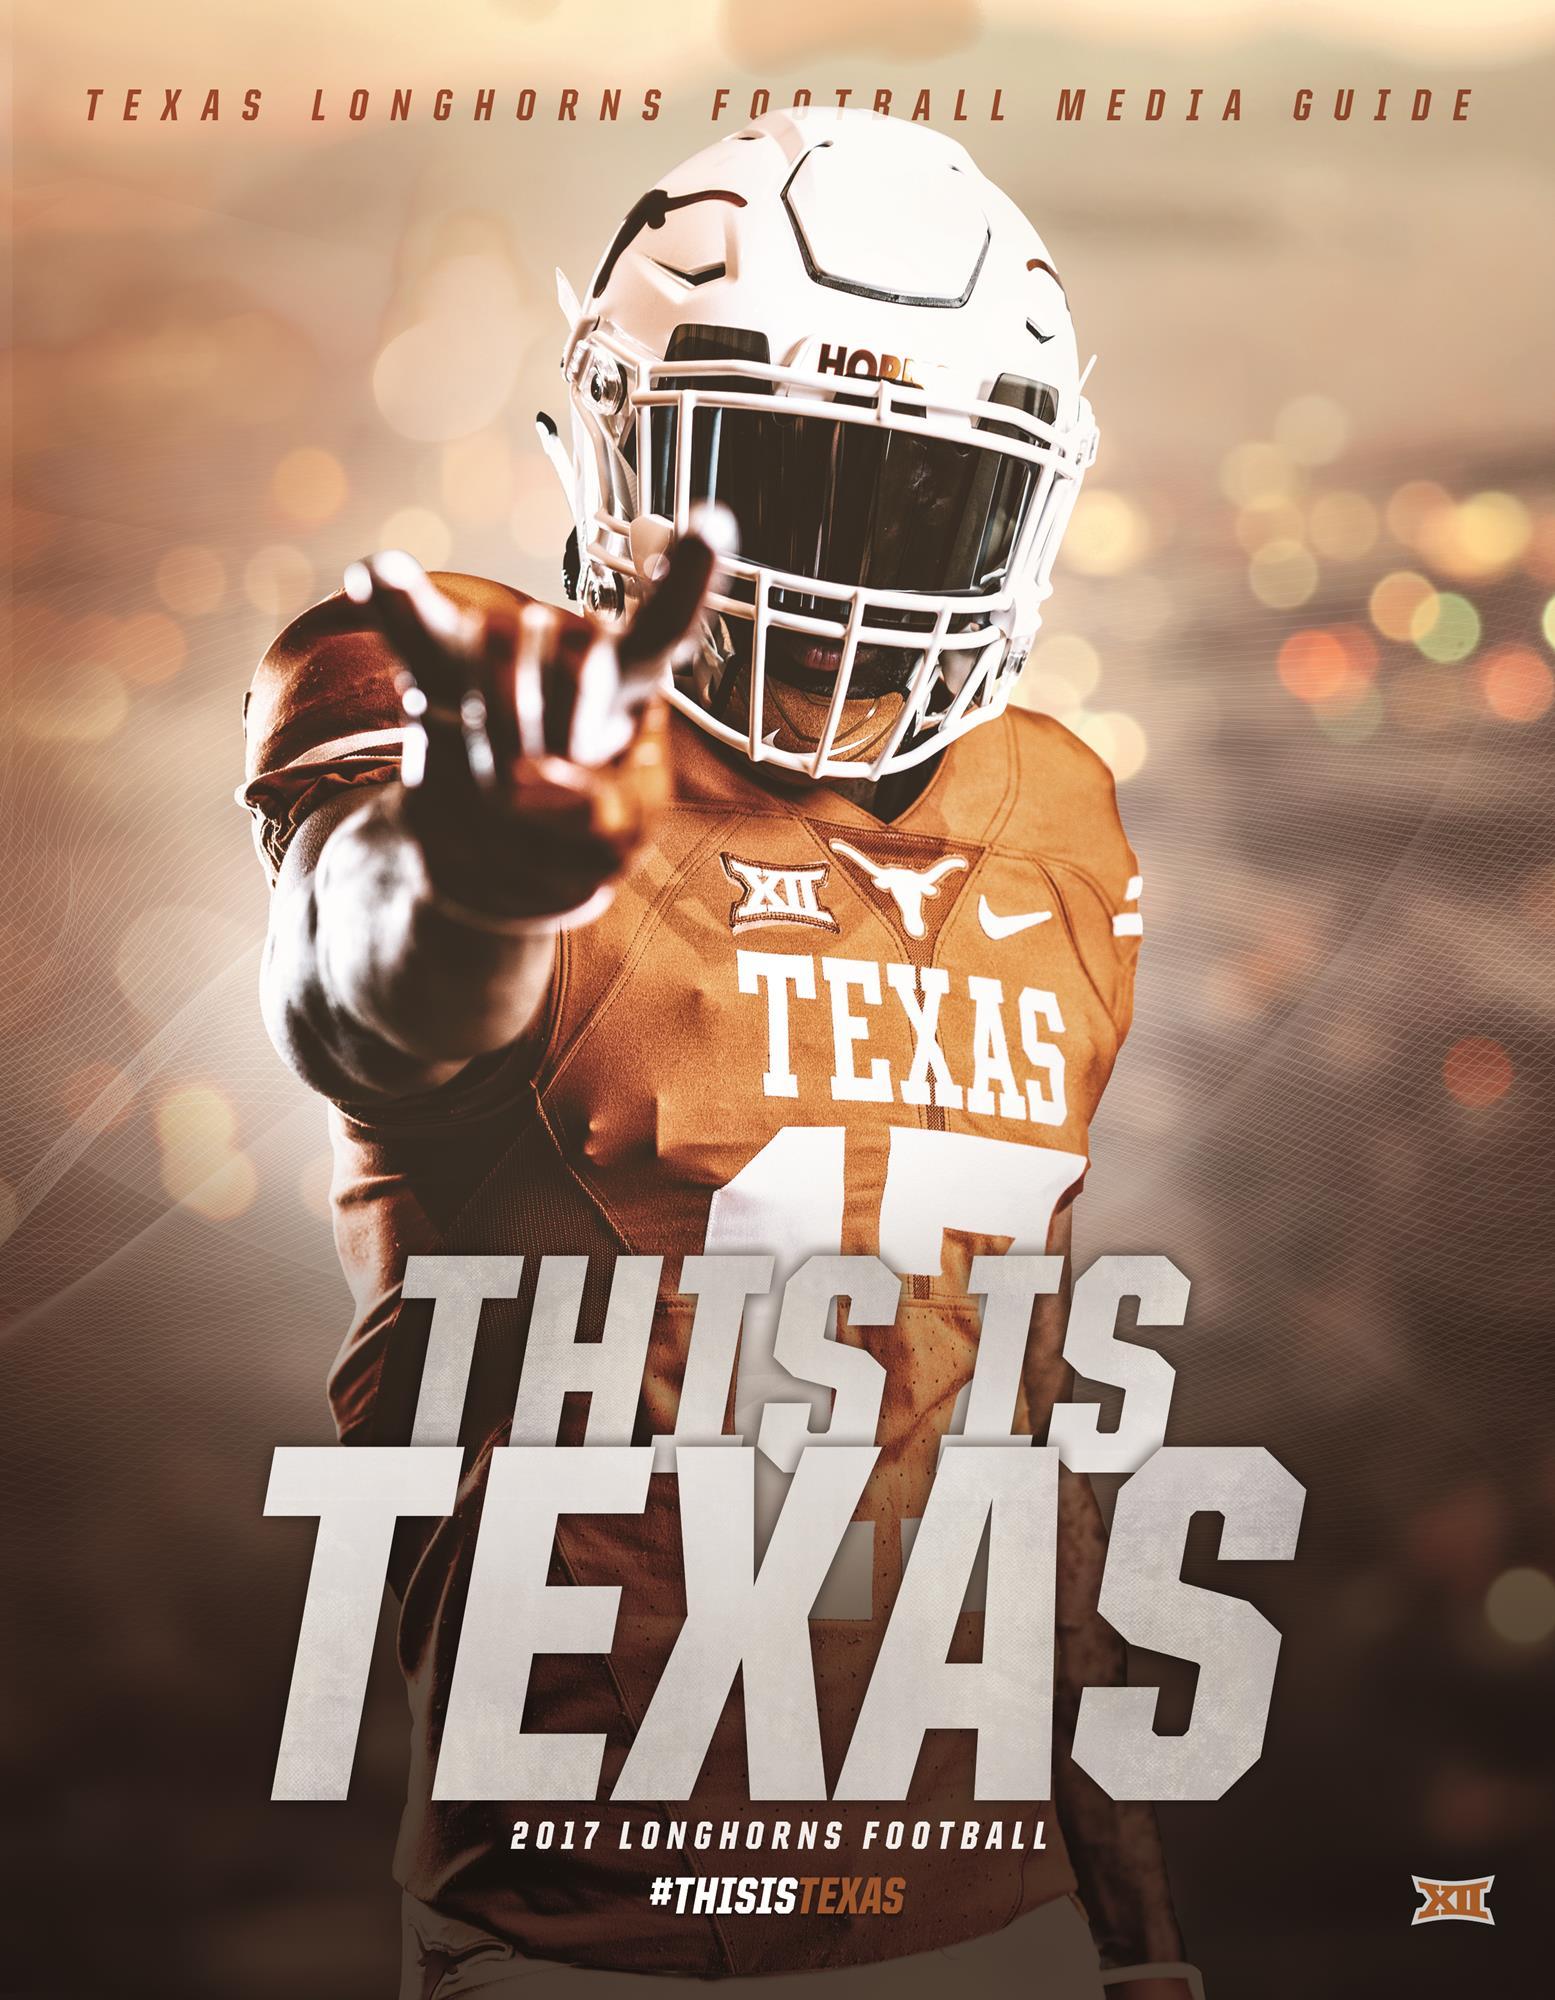 Get a Set of 12 Officially NCAA Licensed Texas Longhorns iPhone Wallpapers  sized for any model of iPhone with  Texas longhorns Texas longhorns  football Longhorn